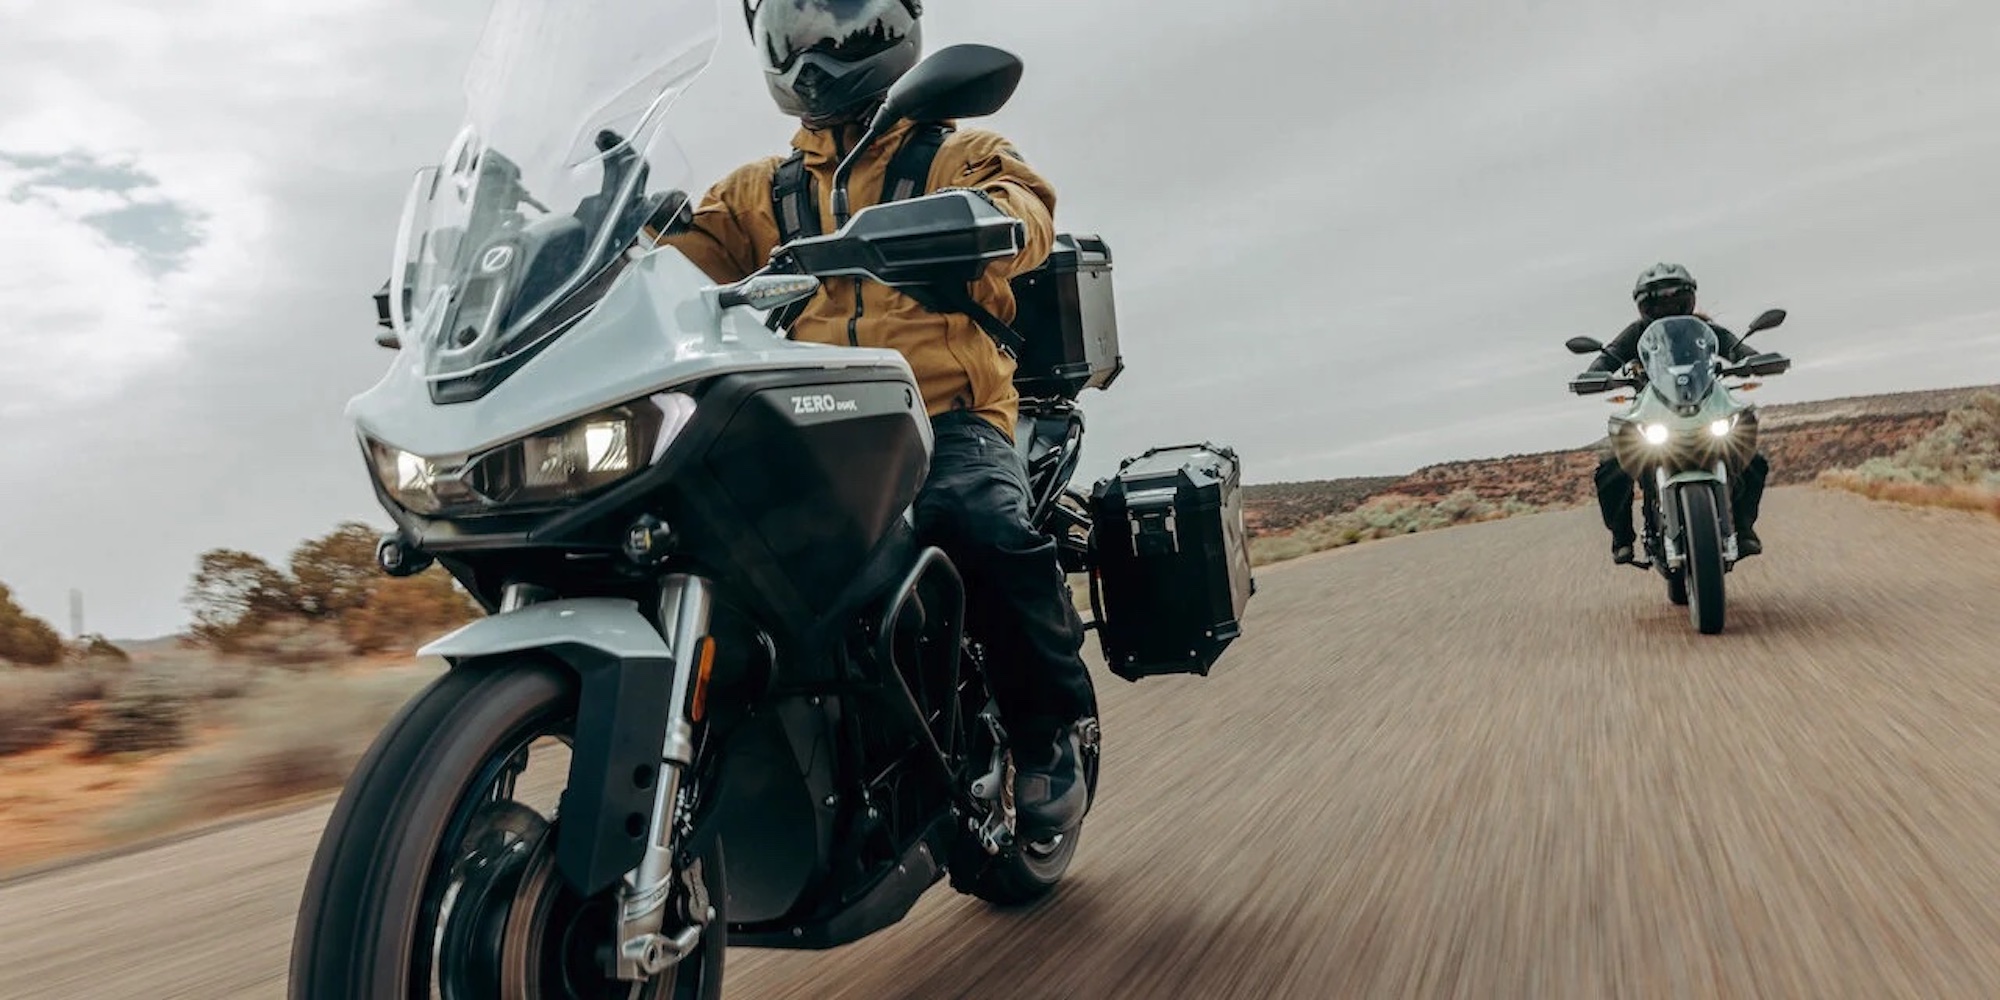 Zero's all-new DSR/X adventure bike out for a quick soon. Media sourced from The EV Report.